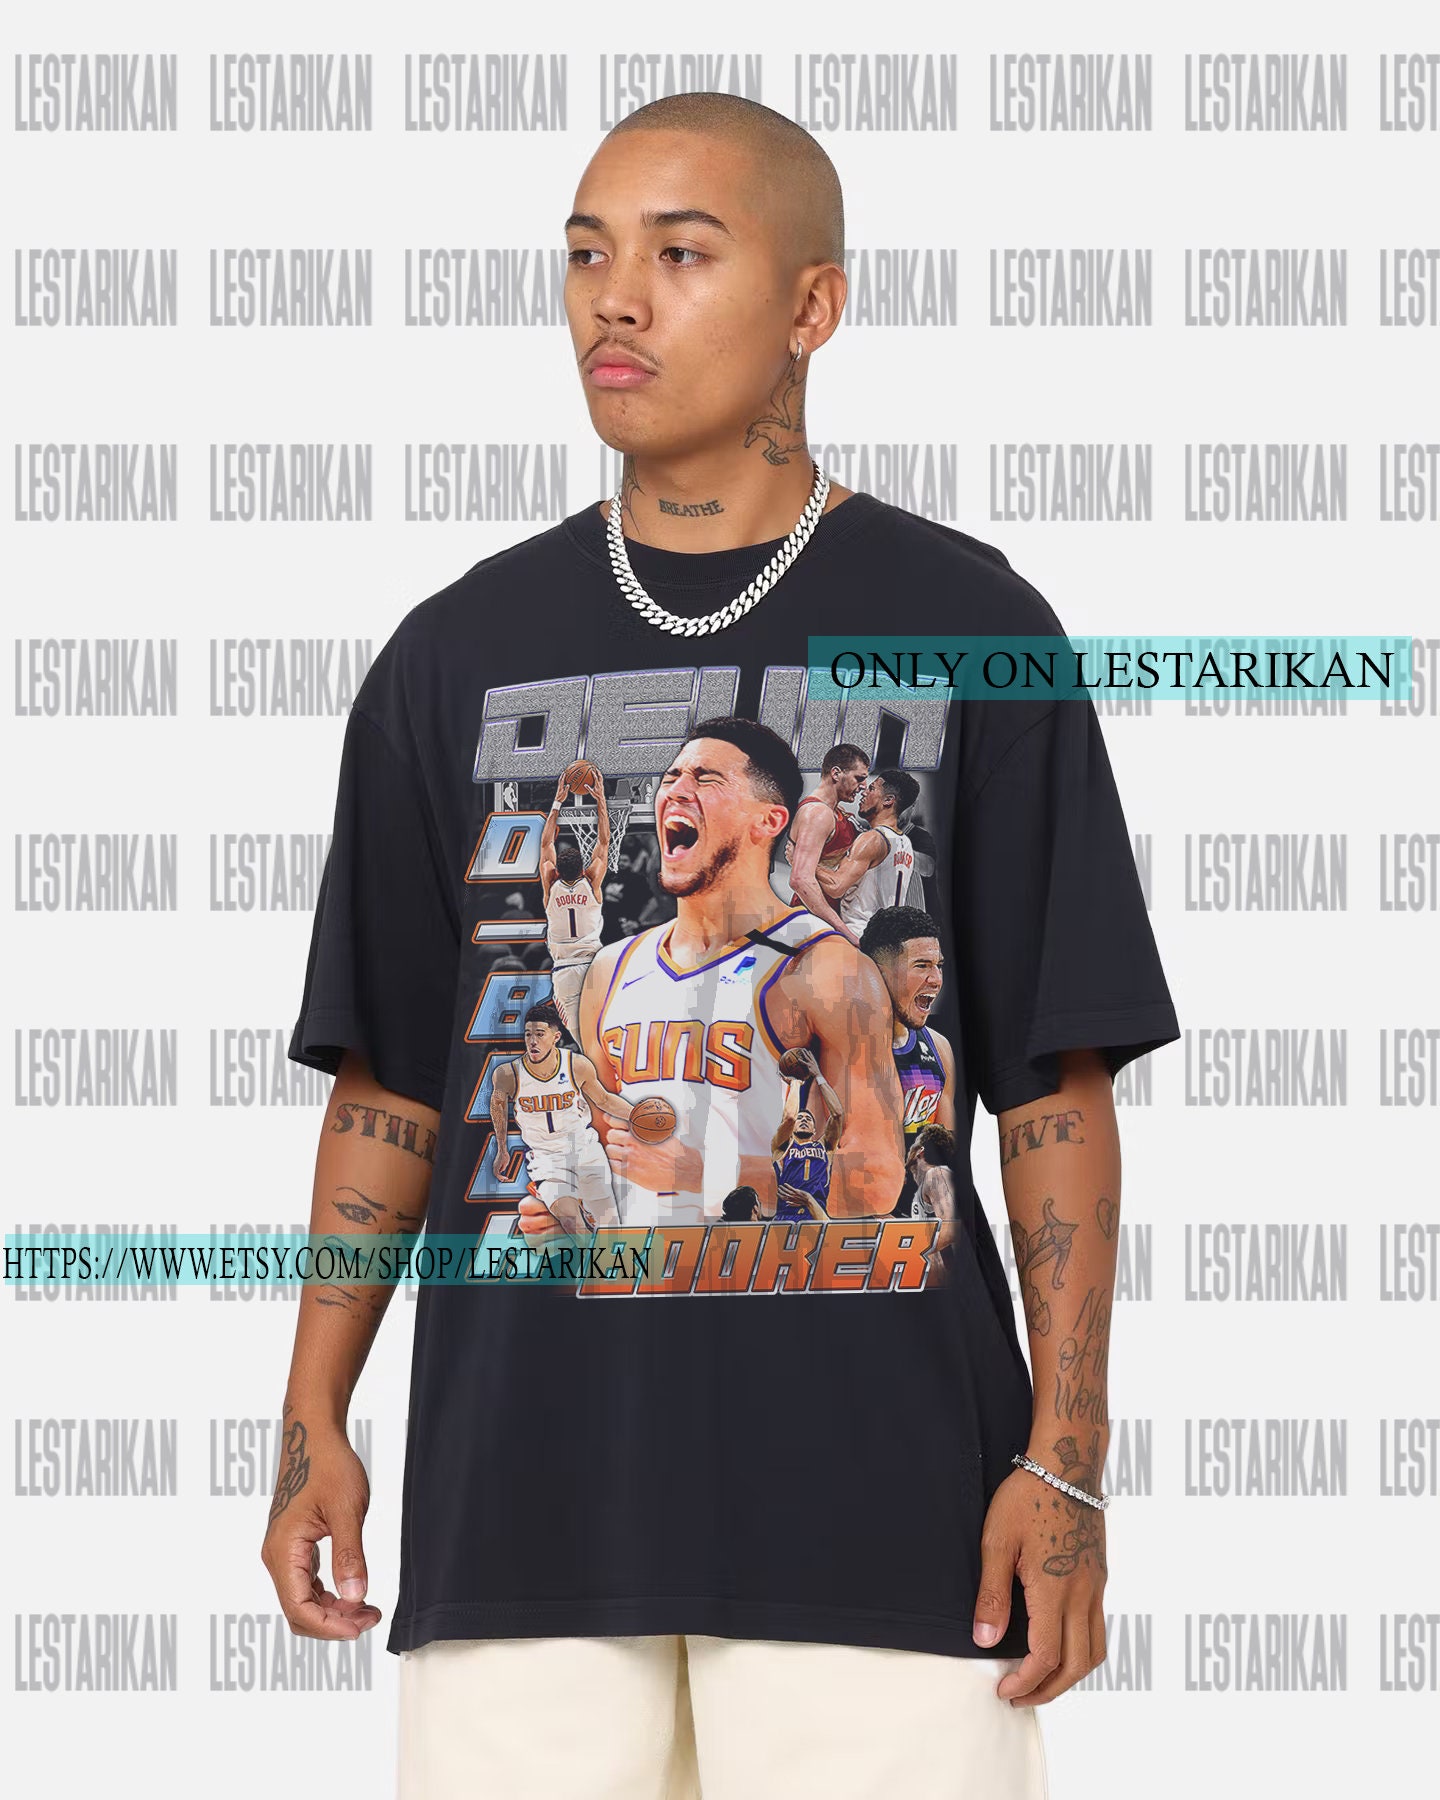 Devin Booker Shirt Basketball Player Vintage Graphic - Anynee